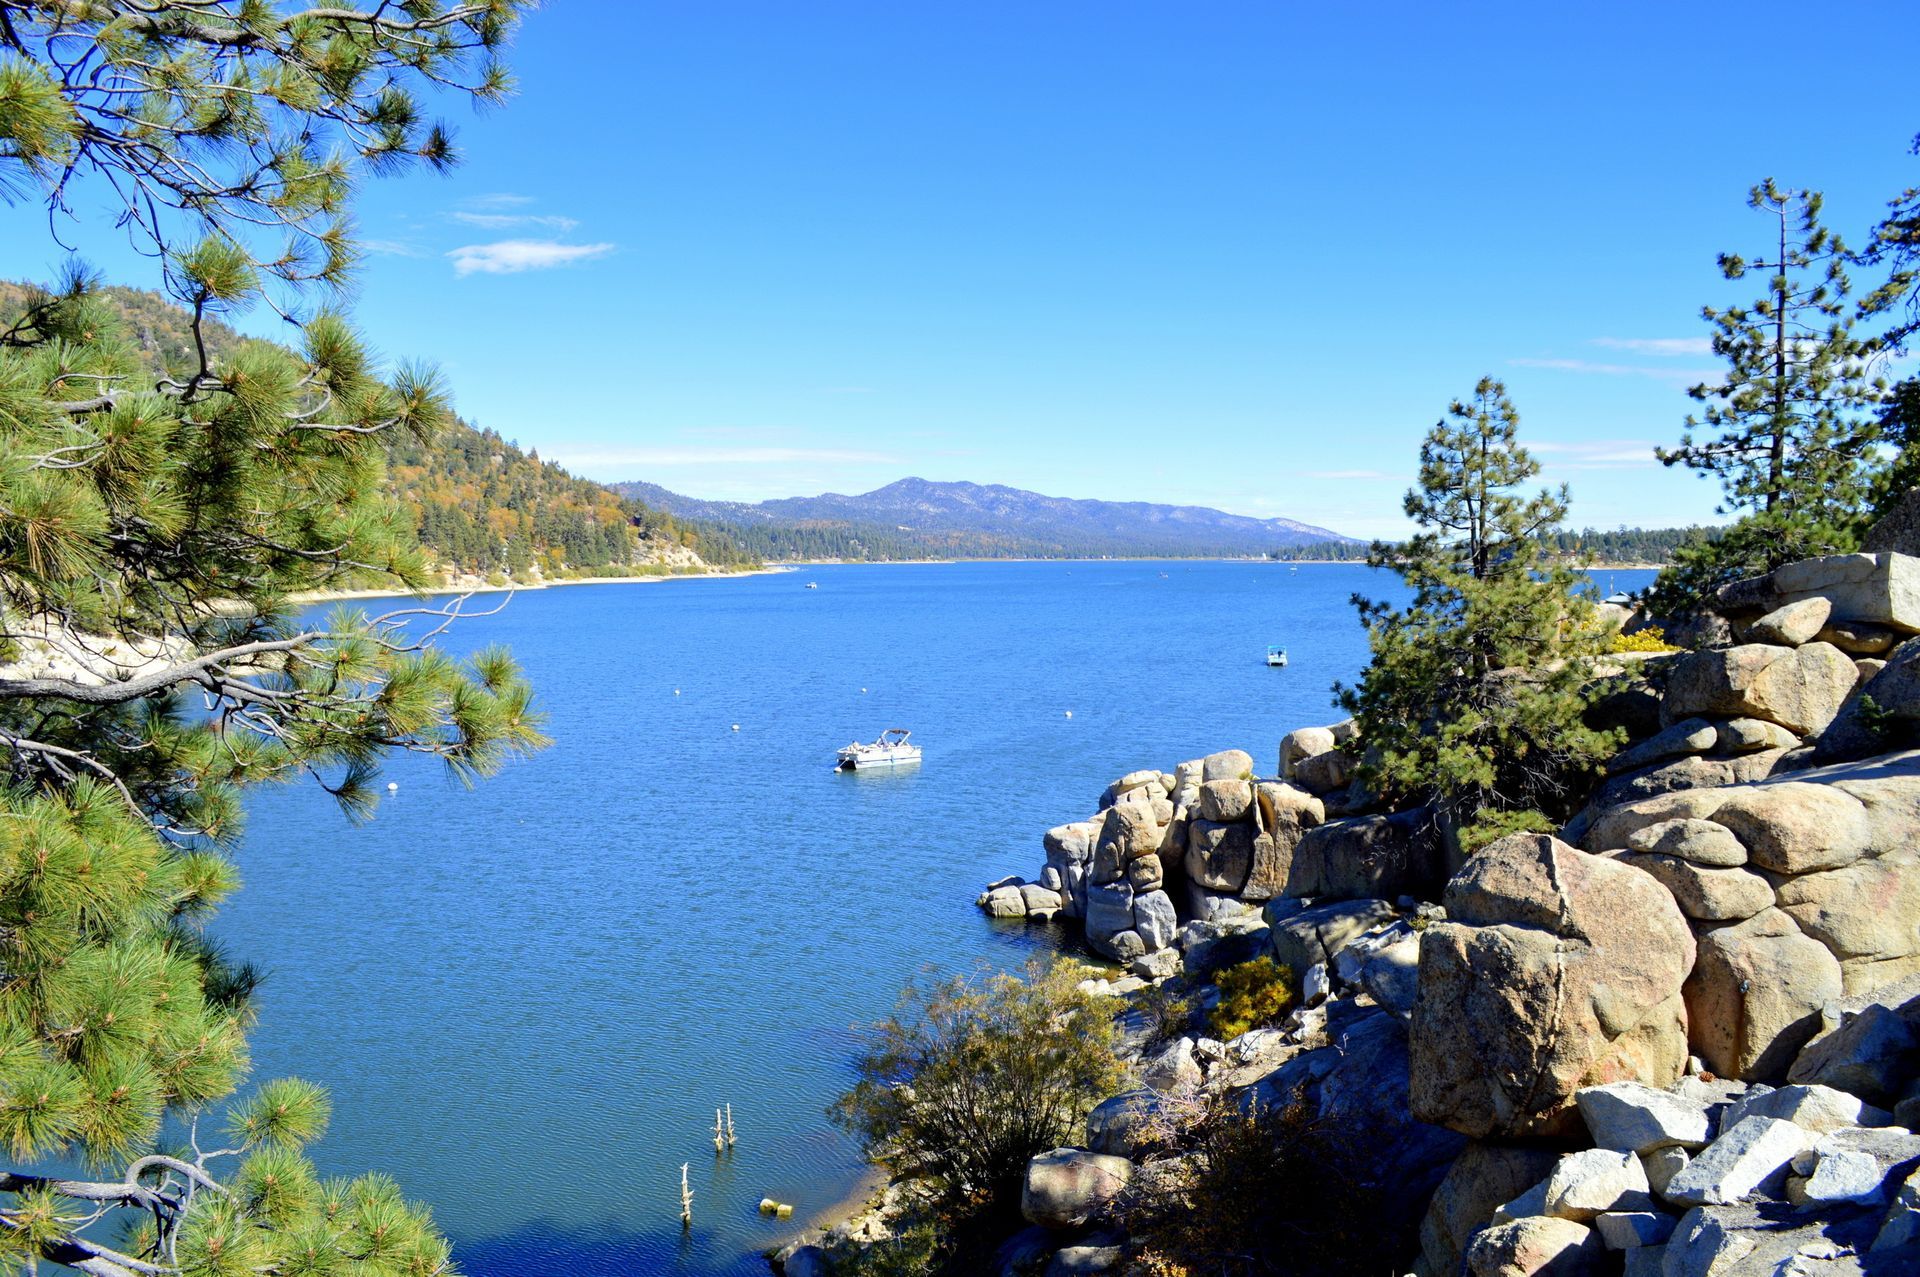 Big Bear lake surrounded by rocks and trees on a sunny day